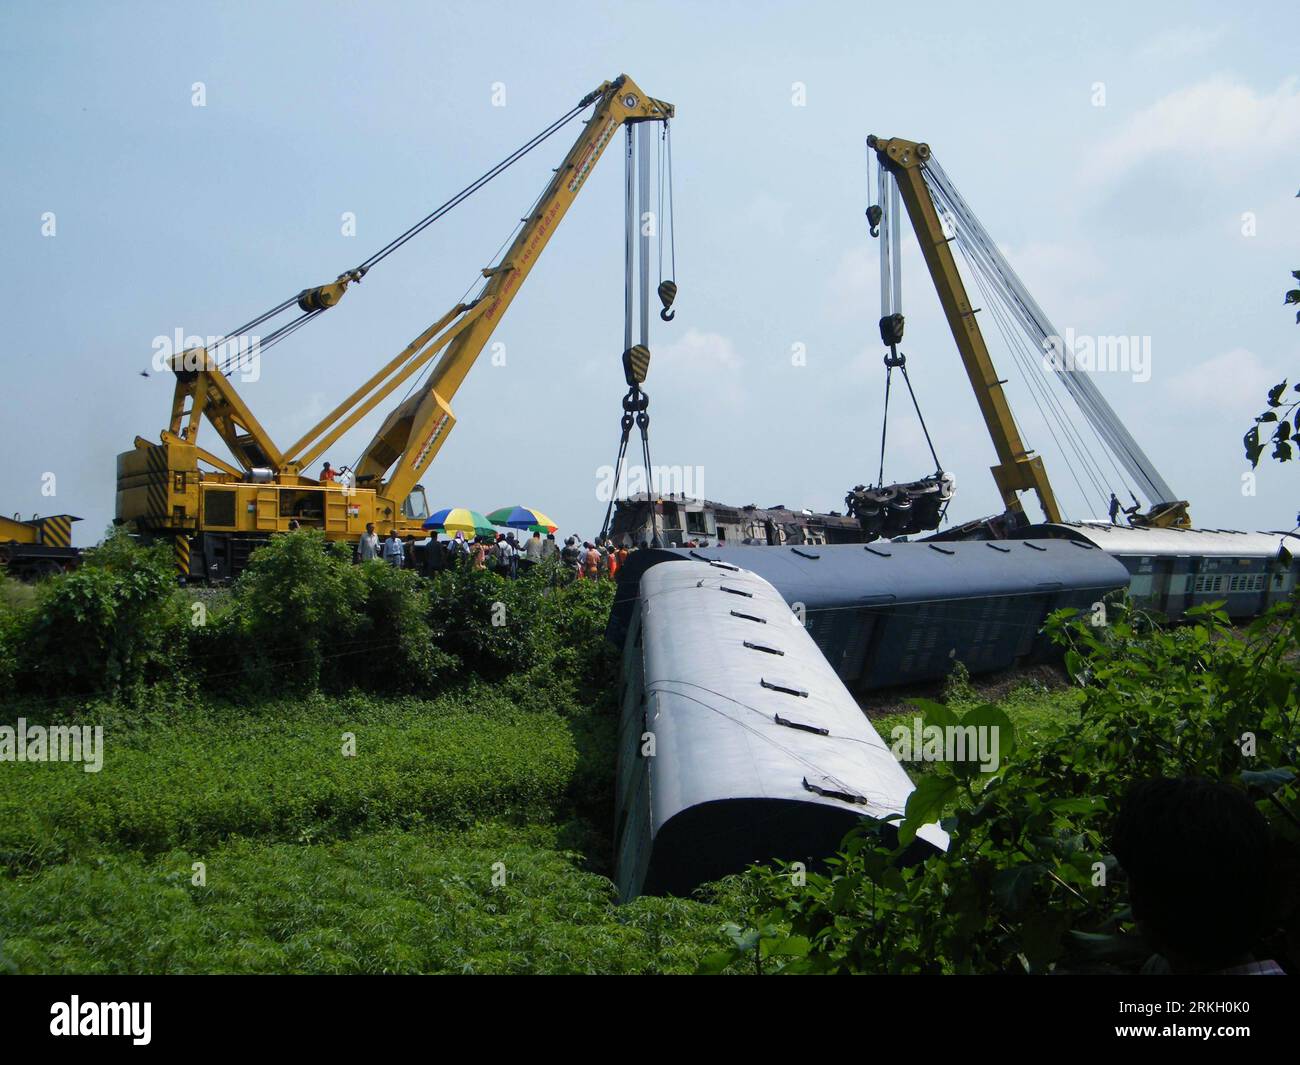 Bildnummer: 55672398  Datum: 31.07.2011  Copyright: imago/Xinhua (110801) -- CALCUTTA, Aug. 1, 2011 (Xinhua) -- Cranes lift carriages to clear the railway track at the scene of a train crash near Jamirghata station at Malda district of West Bengal, India on July, 31, 2011. The death toll in the train collision Sunday evening in the eastern Indian state West Bengal has risen to three while 50 others were injured, said railway officials on Monday. (Xinhua Photo/Stringer)(axy) INDIA-WEST BENGAL-TRAIN CRASH PUBLICATIONxNOTxINxCHN Gesellschaft Zugunglück Unglück Unfall Kran xdp premiumd 2011 quer o Stock Photo